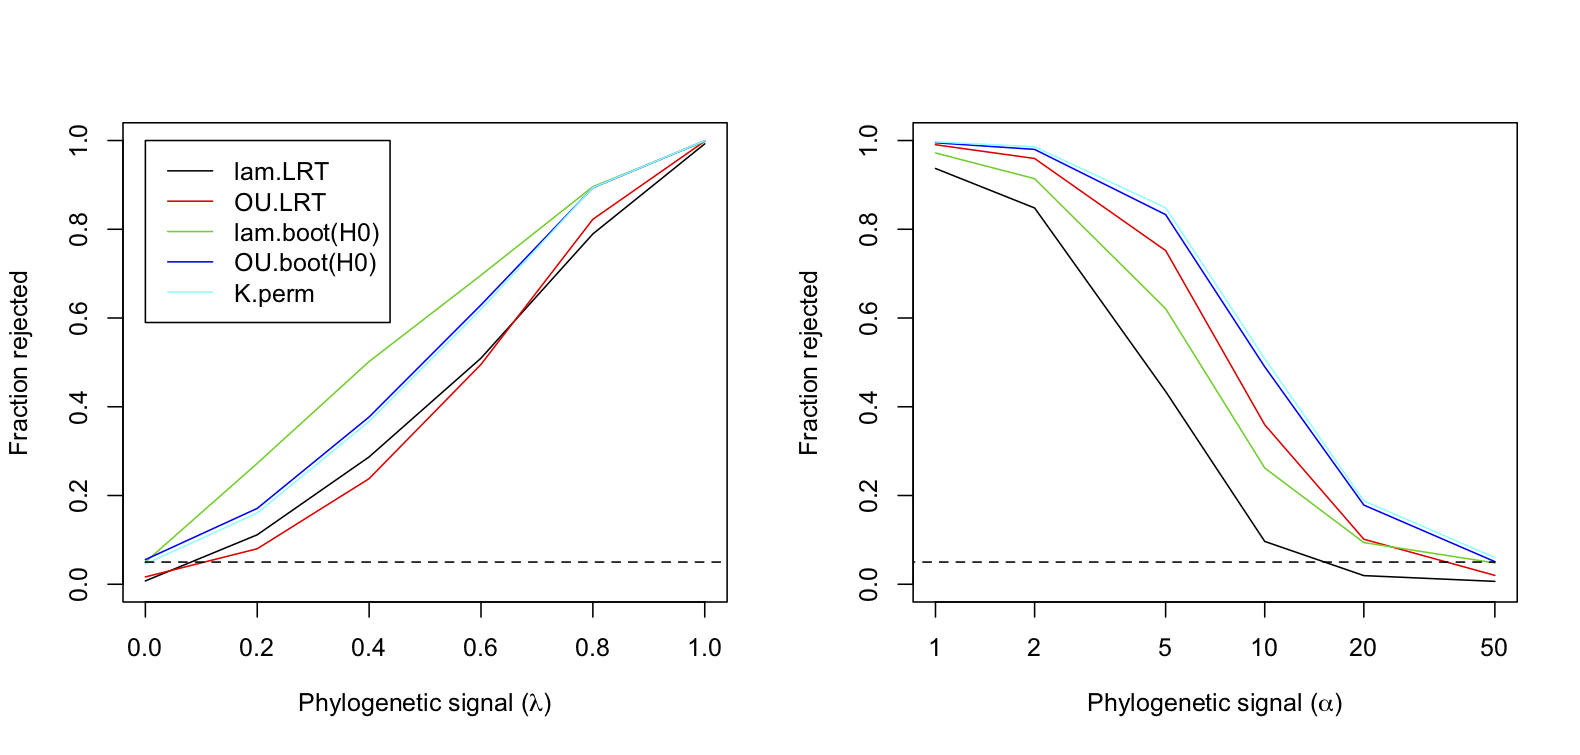 Fig. 3.8: Power curves for tests of phylogenetic signal in datasets generated using Pagel's λ branch-length transform (left panel) and the OU branch-length transform (right panel). For each set of simulated datasets, phylogenetic signal was measured using Pagel's λ and OU transforms with a LRT (lambda.LRT  and OU.LRT), Pagel's λ and OU transforms with a parametric bootstrapped LRT under H0 (lam.boot(H0) and OU.boot(H0)), and Blomberg's *K* with a permutation test (K.perm). Note that the lines for OU.boot(H0) and K.perm almost coincide.